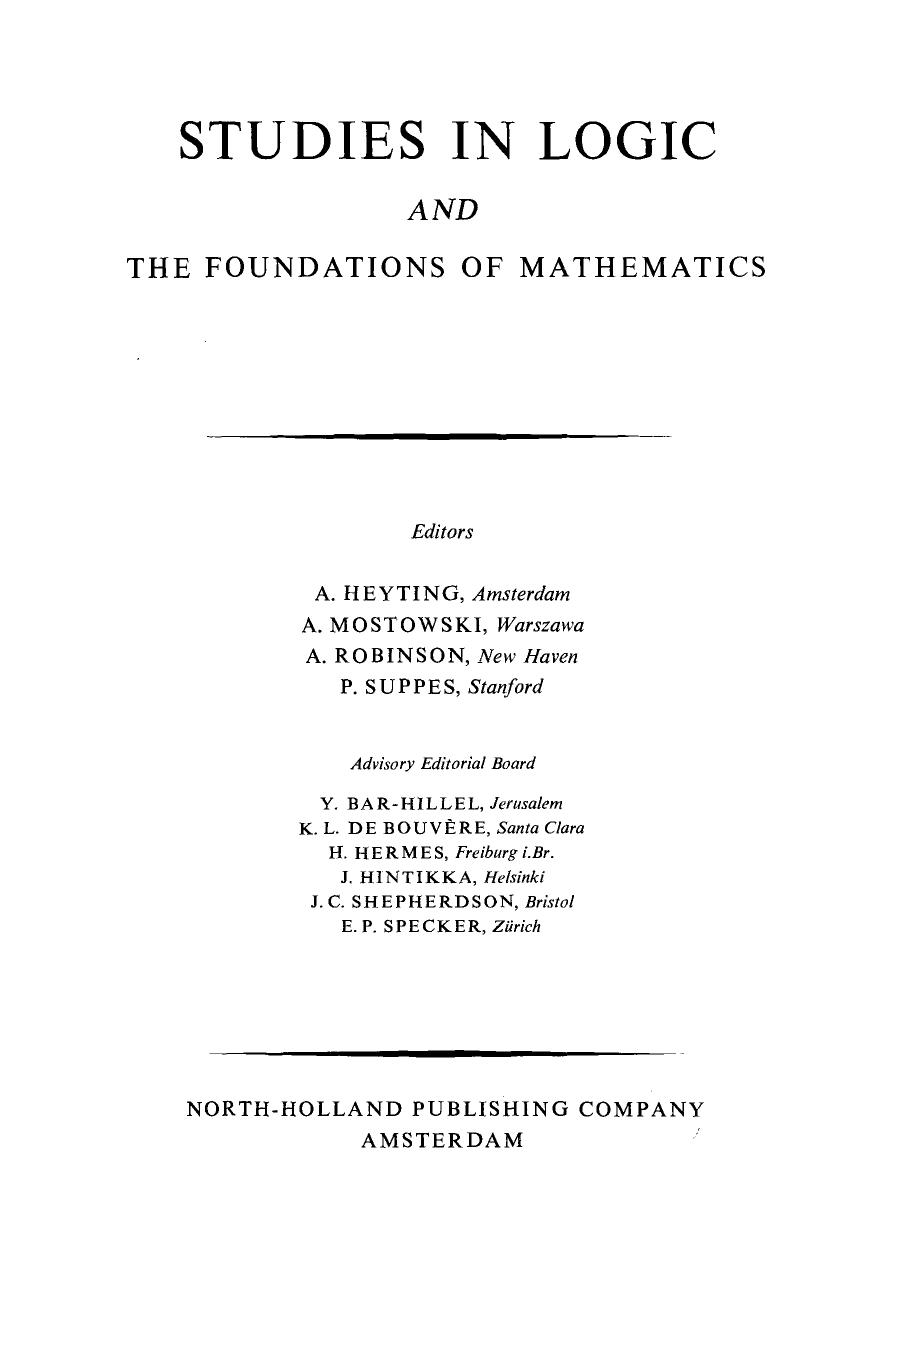 Studies in Logic and the Foundations of Mathematics